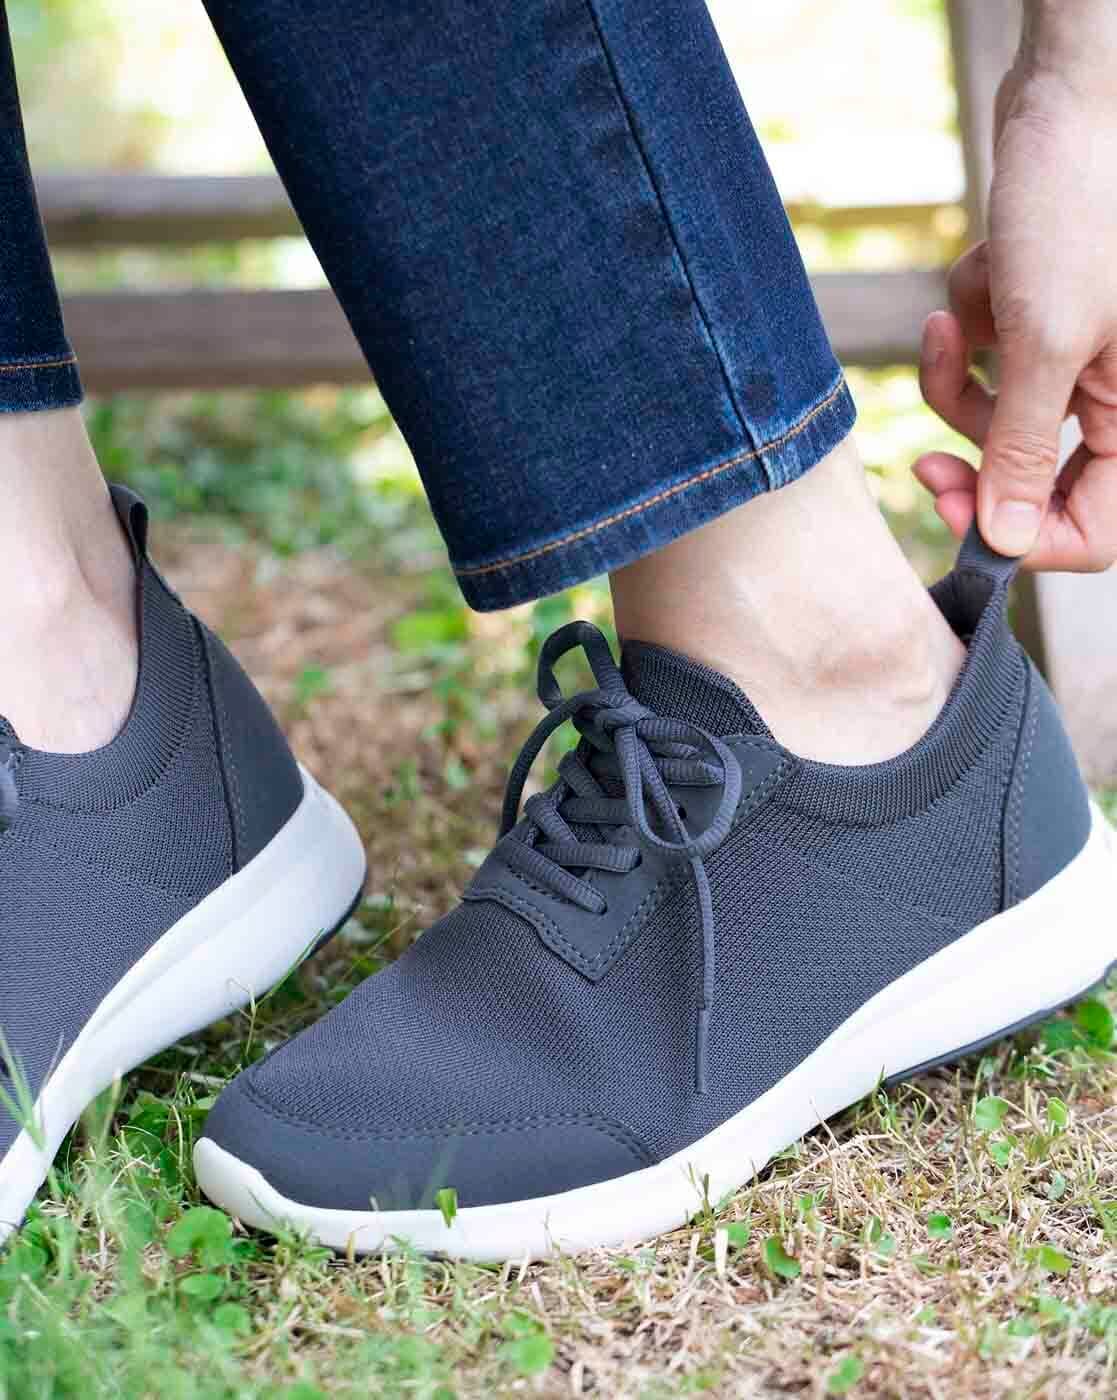 Mukishoes Review - A Sustainable Barefoot Shoe Brand | Anya's Reviews